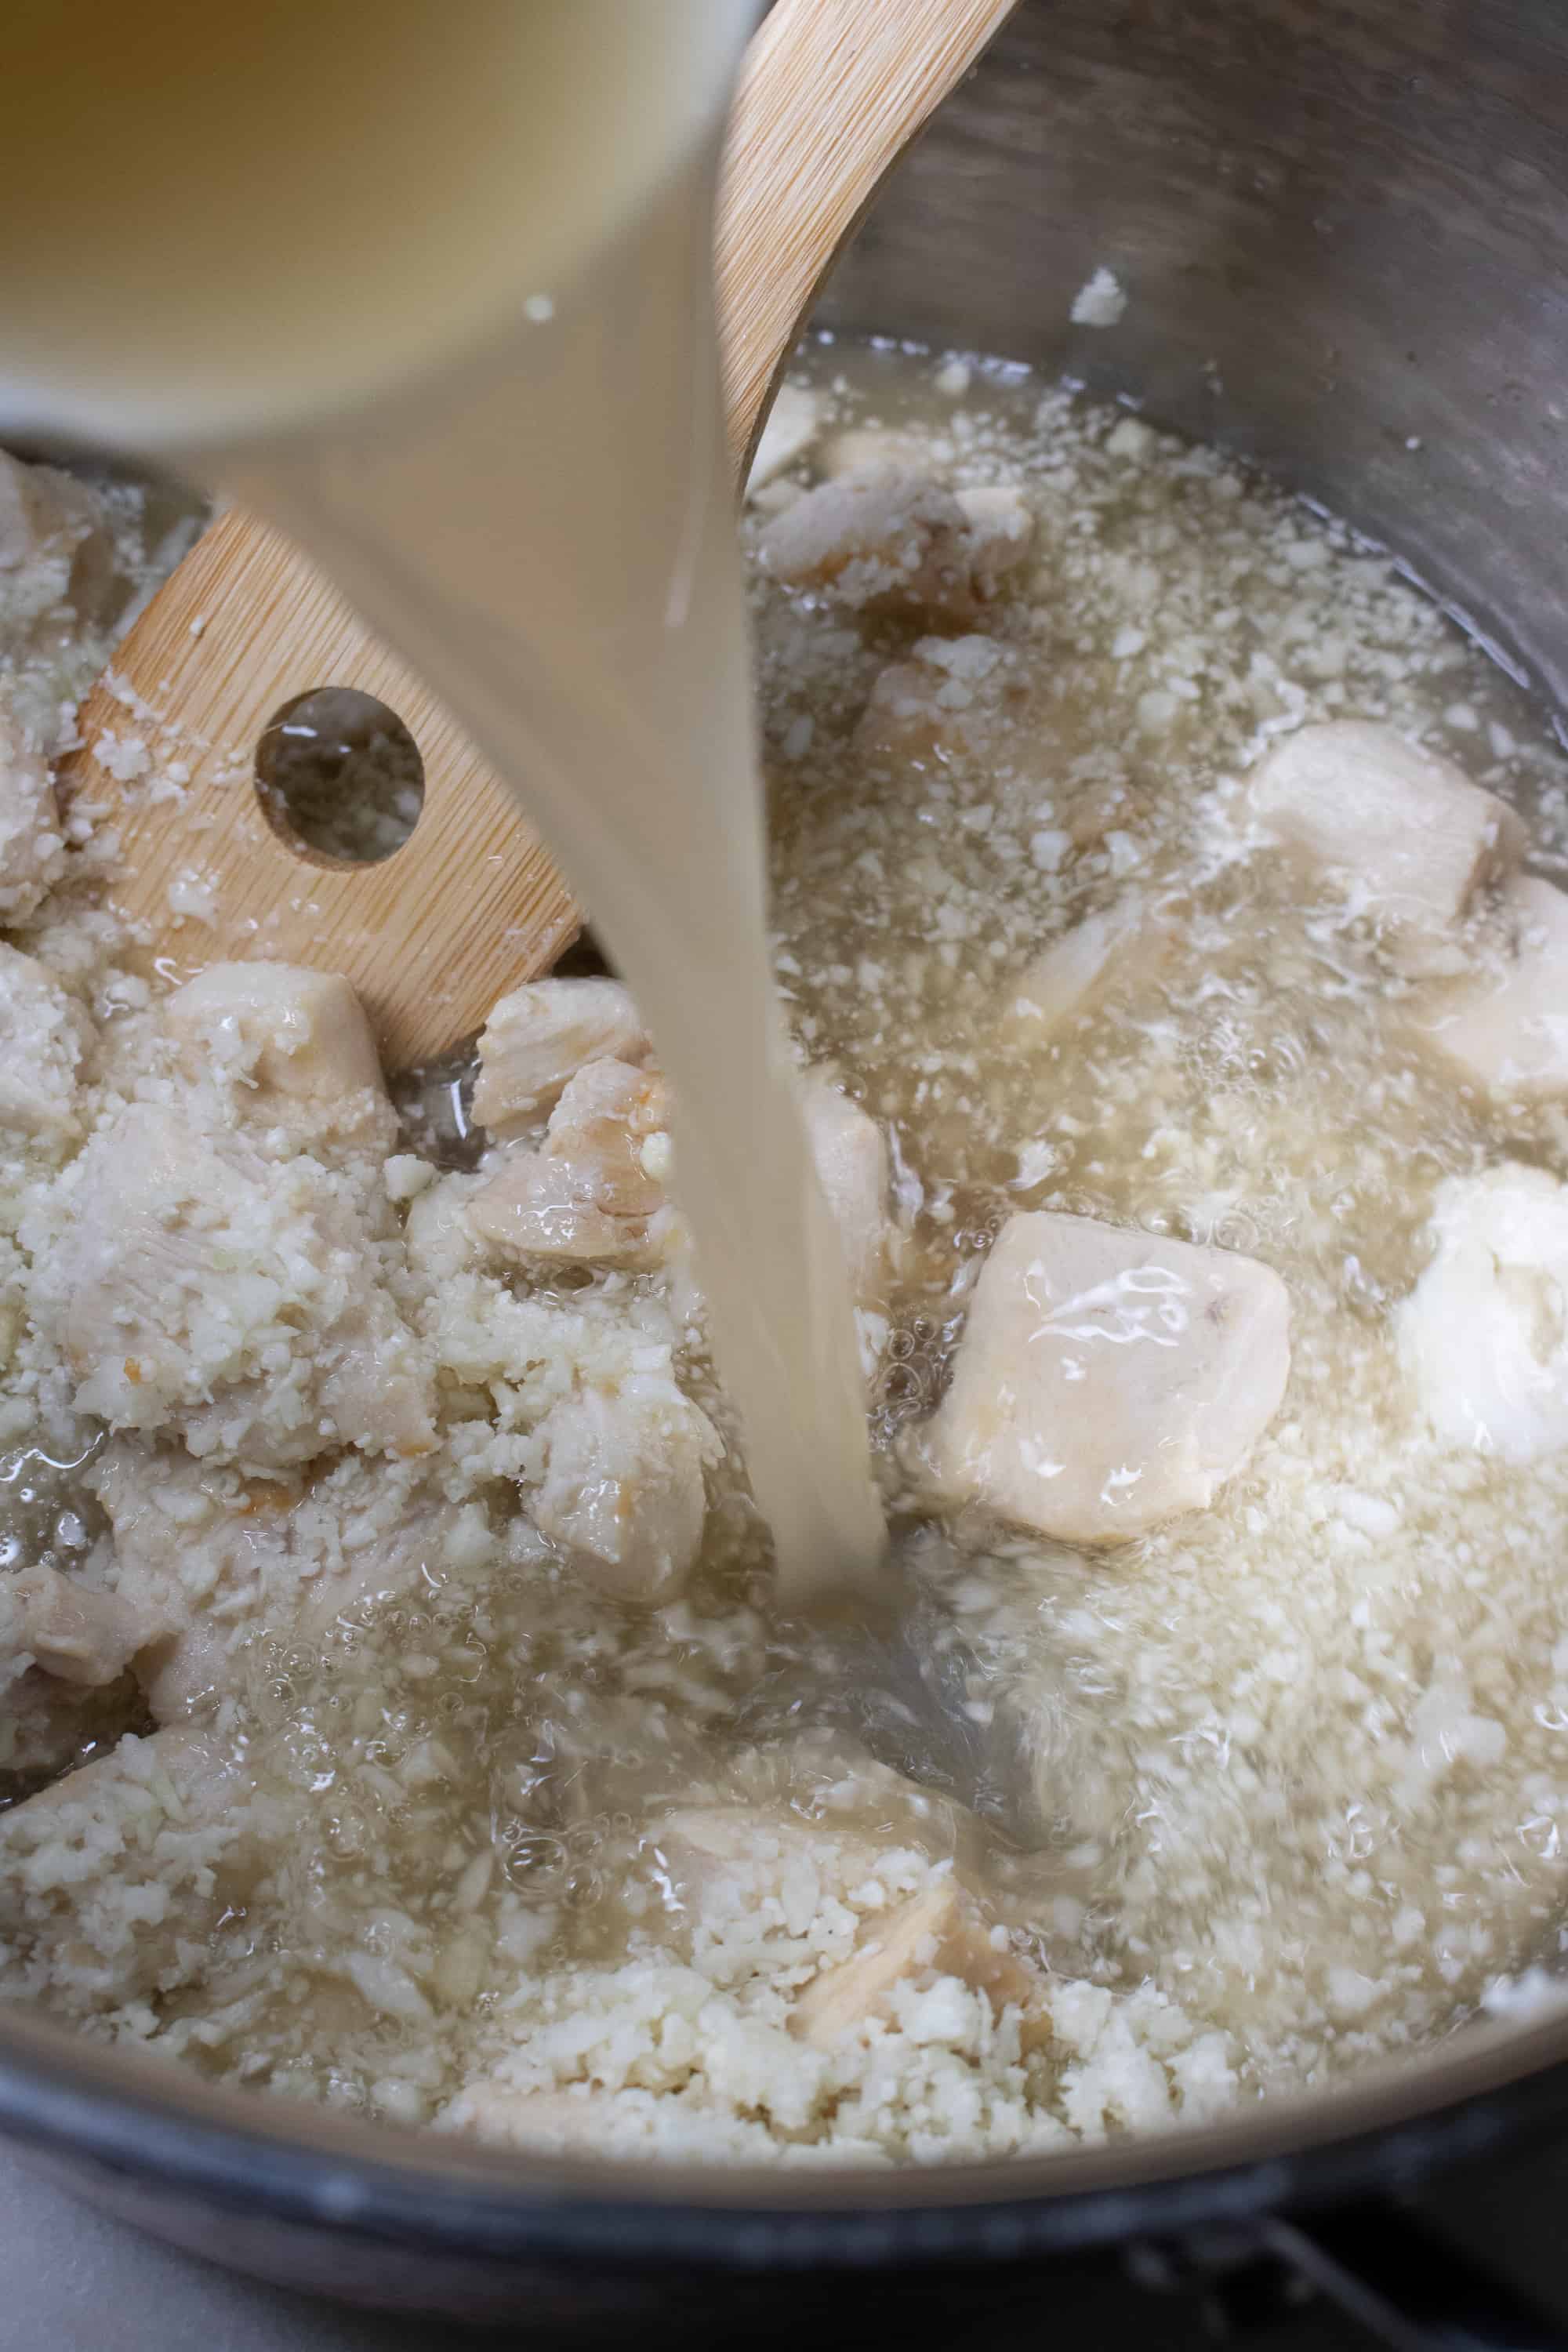 Coconut milk being poured into the cooking pot with the chicken and cauliflower rice for Curry Chicken and Cauliflower Rice soup